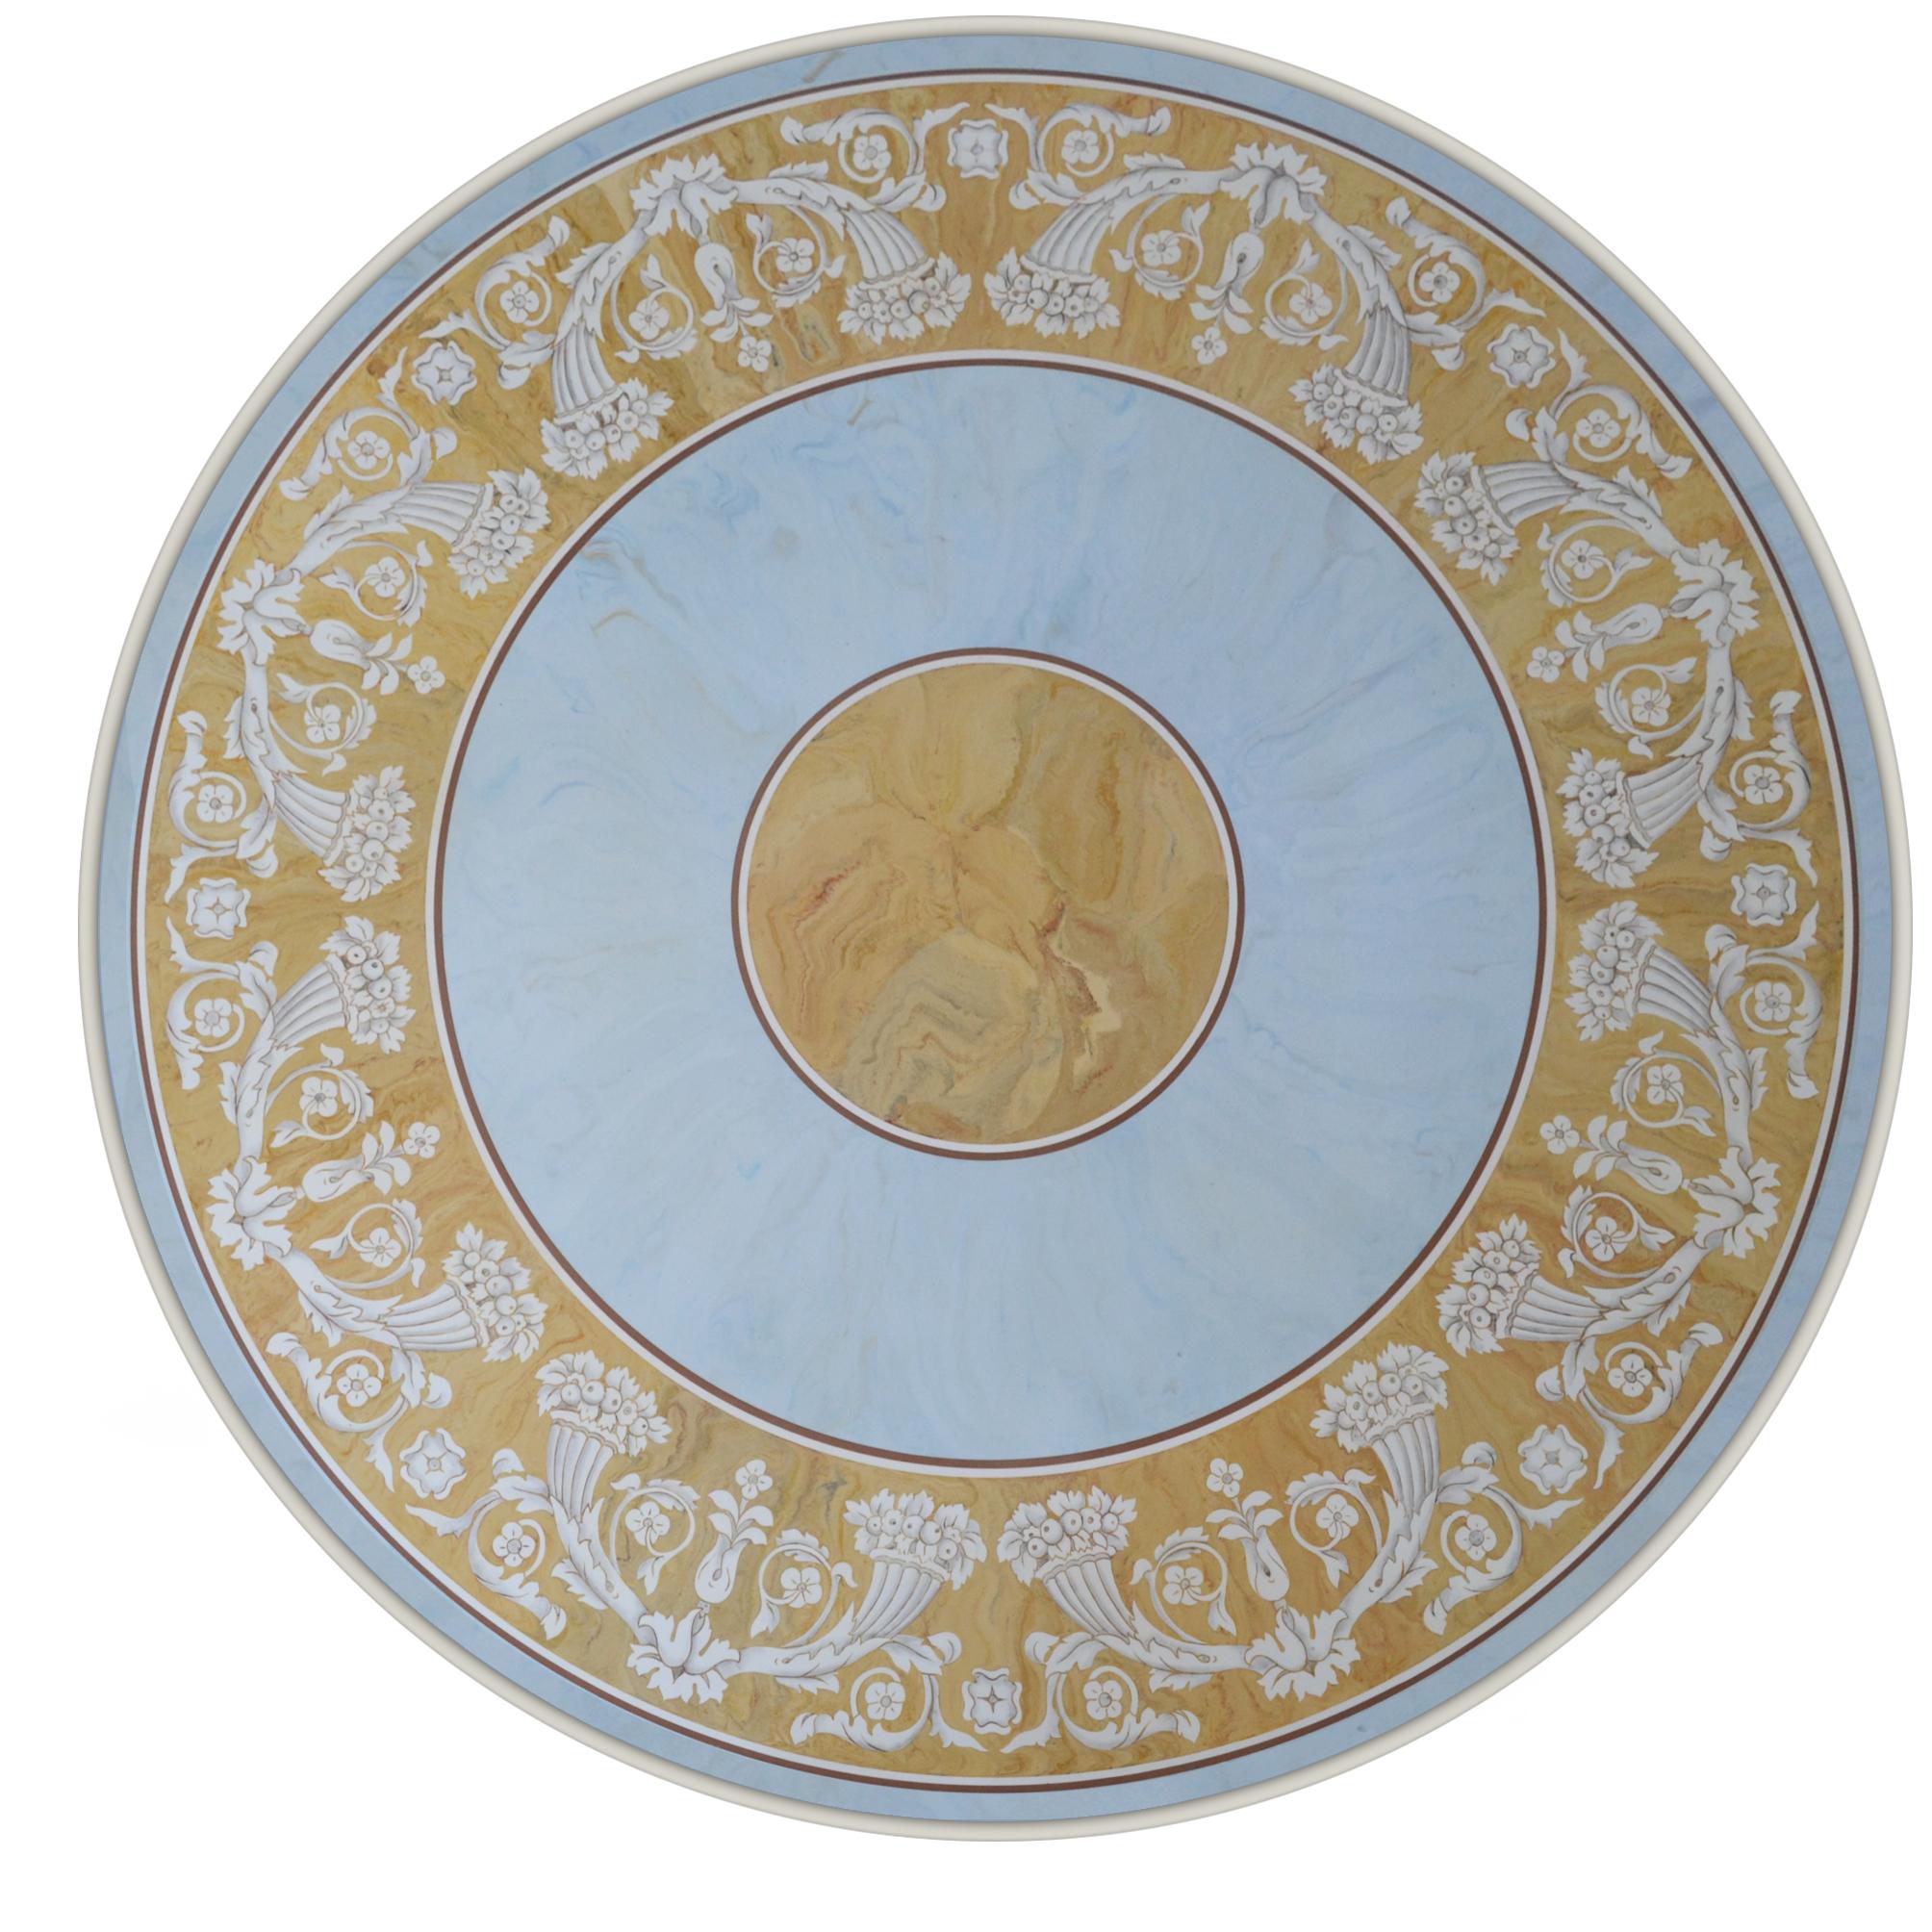 Verbena round dining or center table
This table with Scagliola art inlay takes inspiration from the classical paliotto with a frame of cornucopias. The choice of colors, Siena yellow and light blue give a sophisticated effect to this romantic table